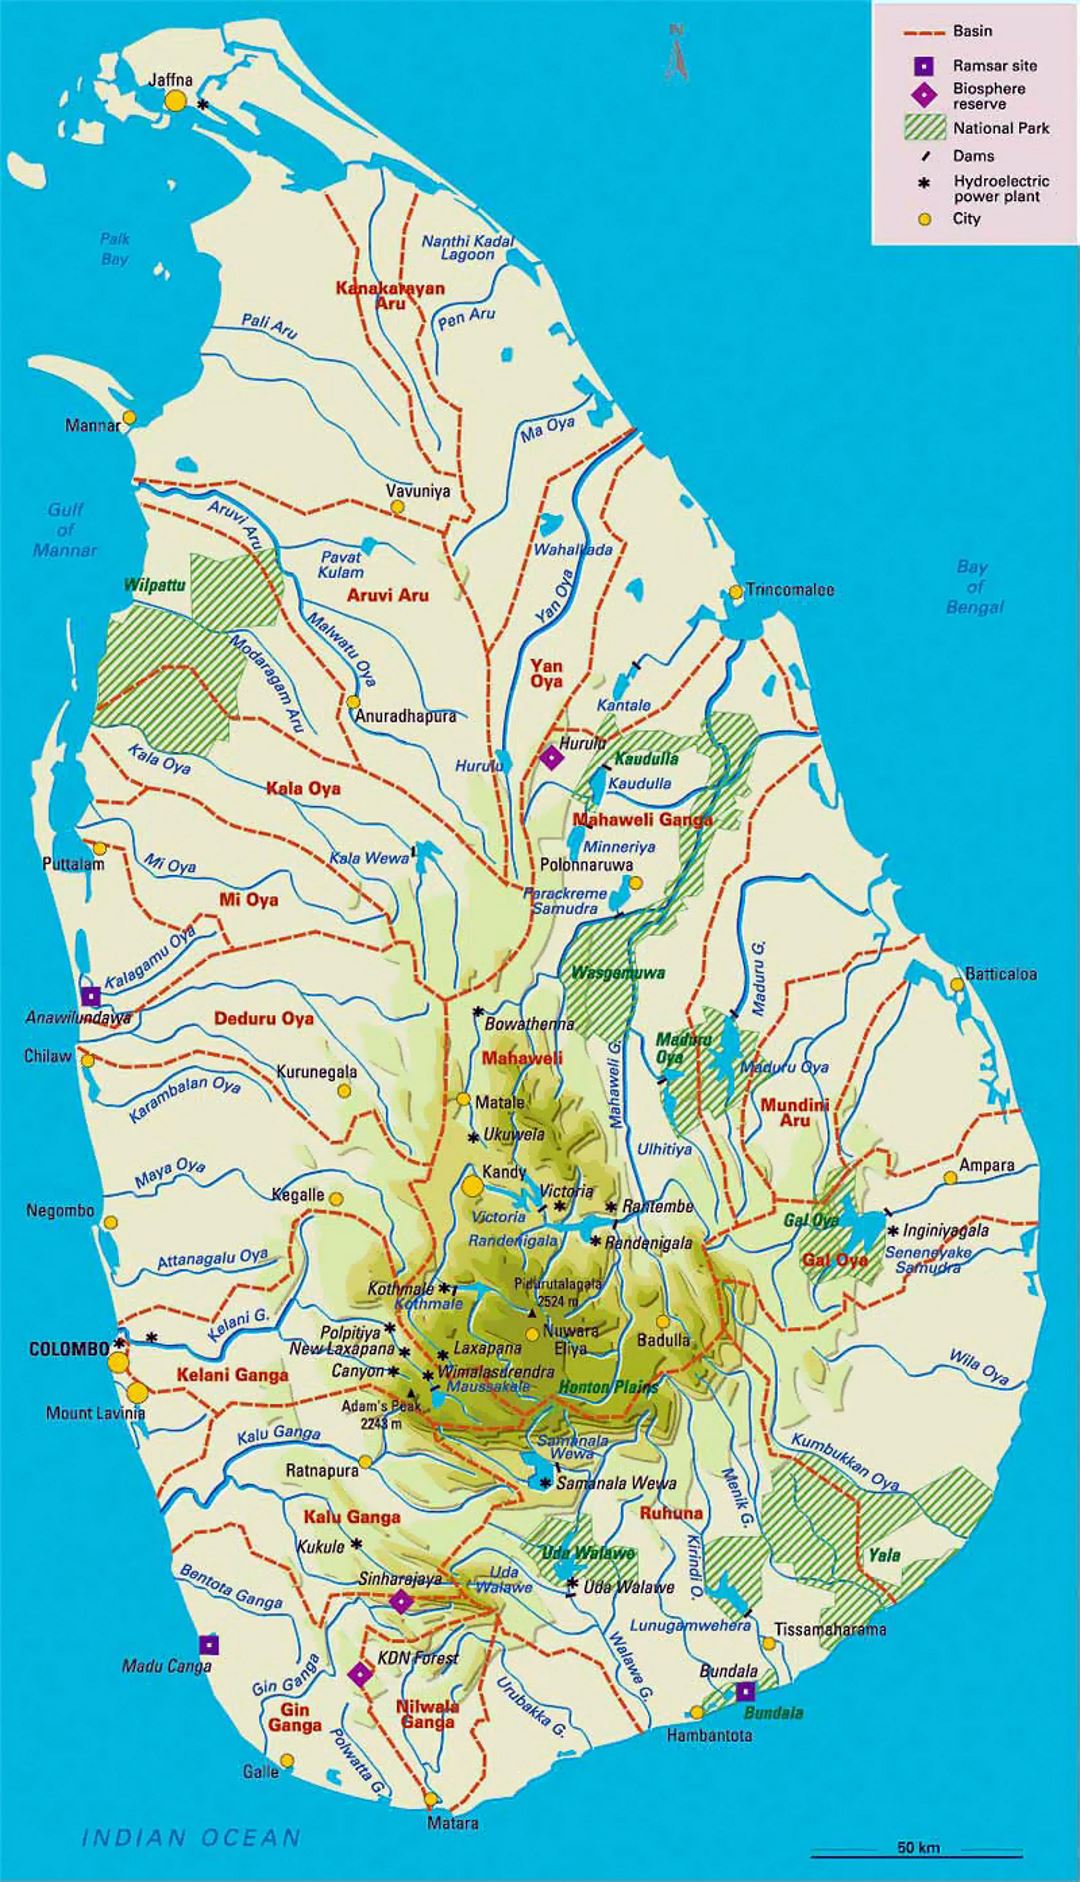 Elevation and travel map of Sri Lanka with administrative divisions